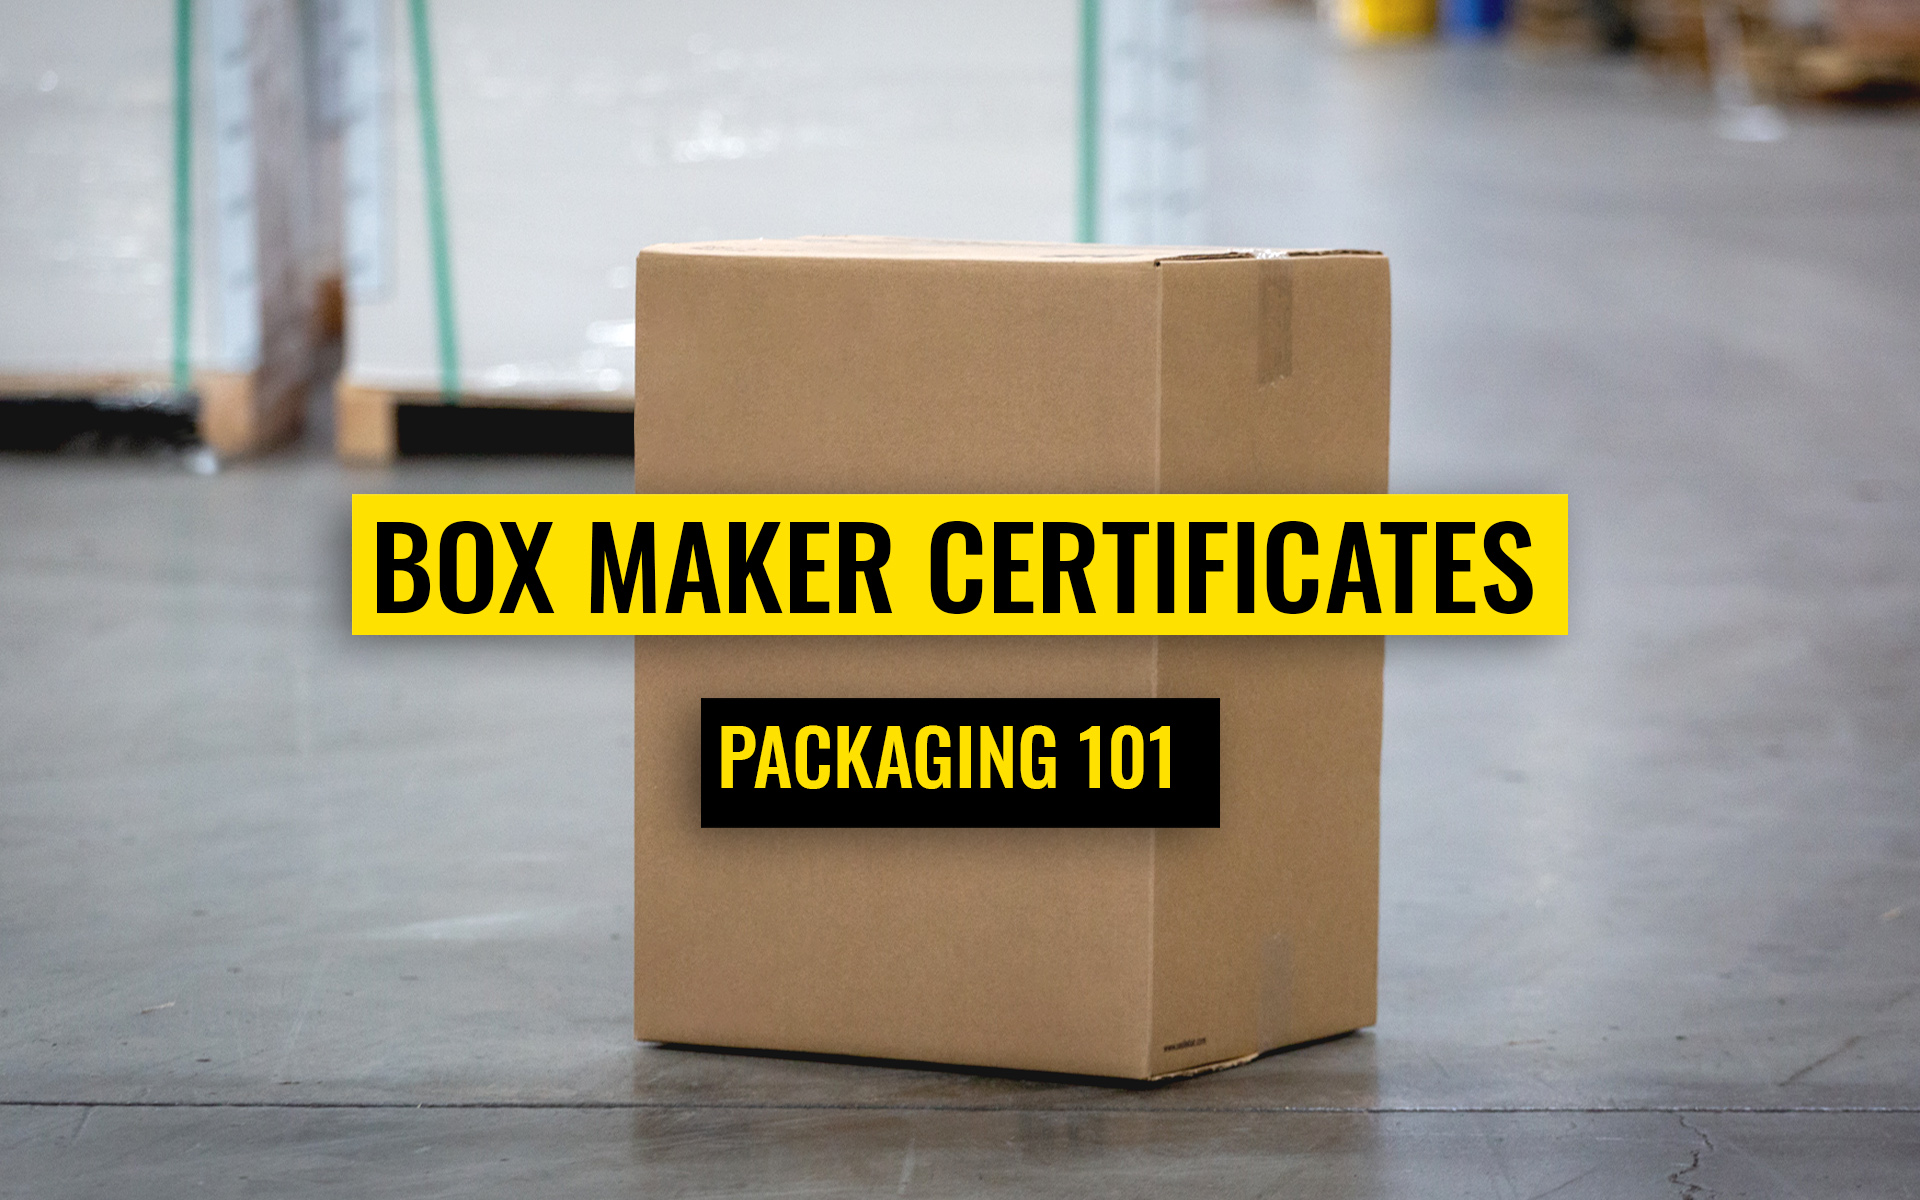 Corrugated box in a concrete warehouse floor with text in front that says "Box Maker Certificates, packaging 101"